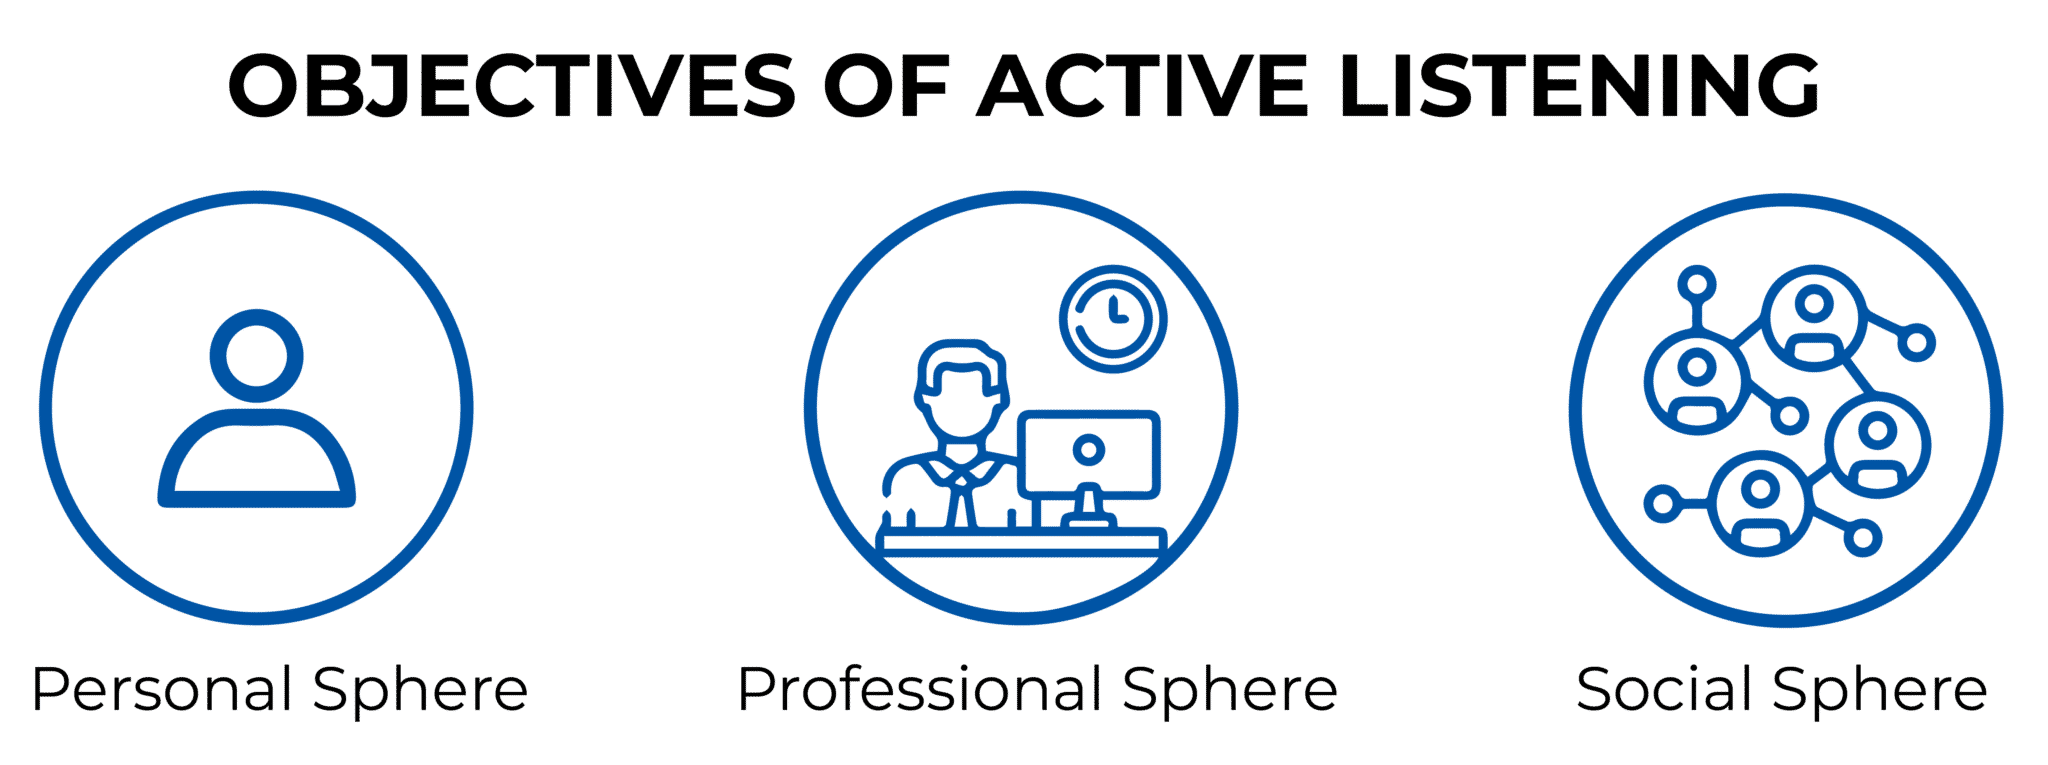 OBJECTIVES OF ACTIVE LISTENING